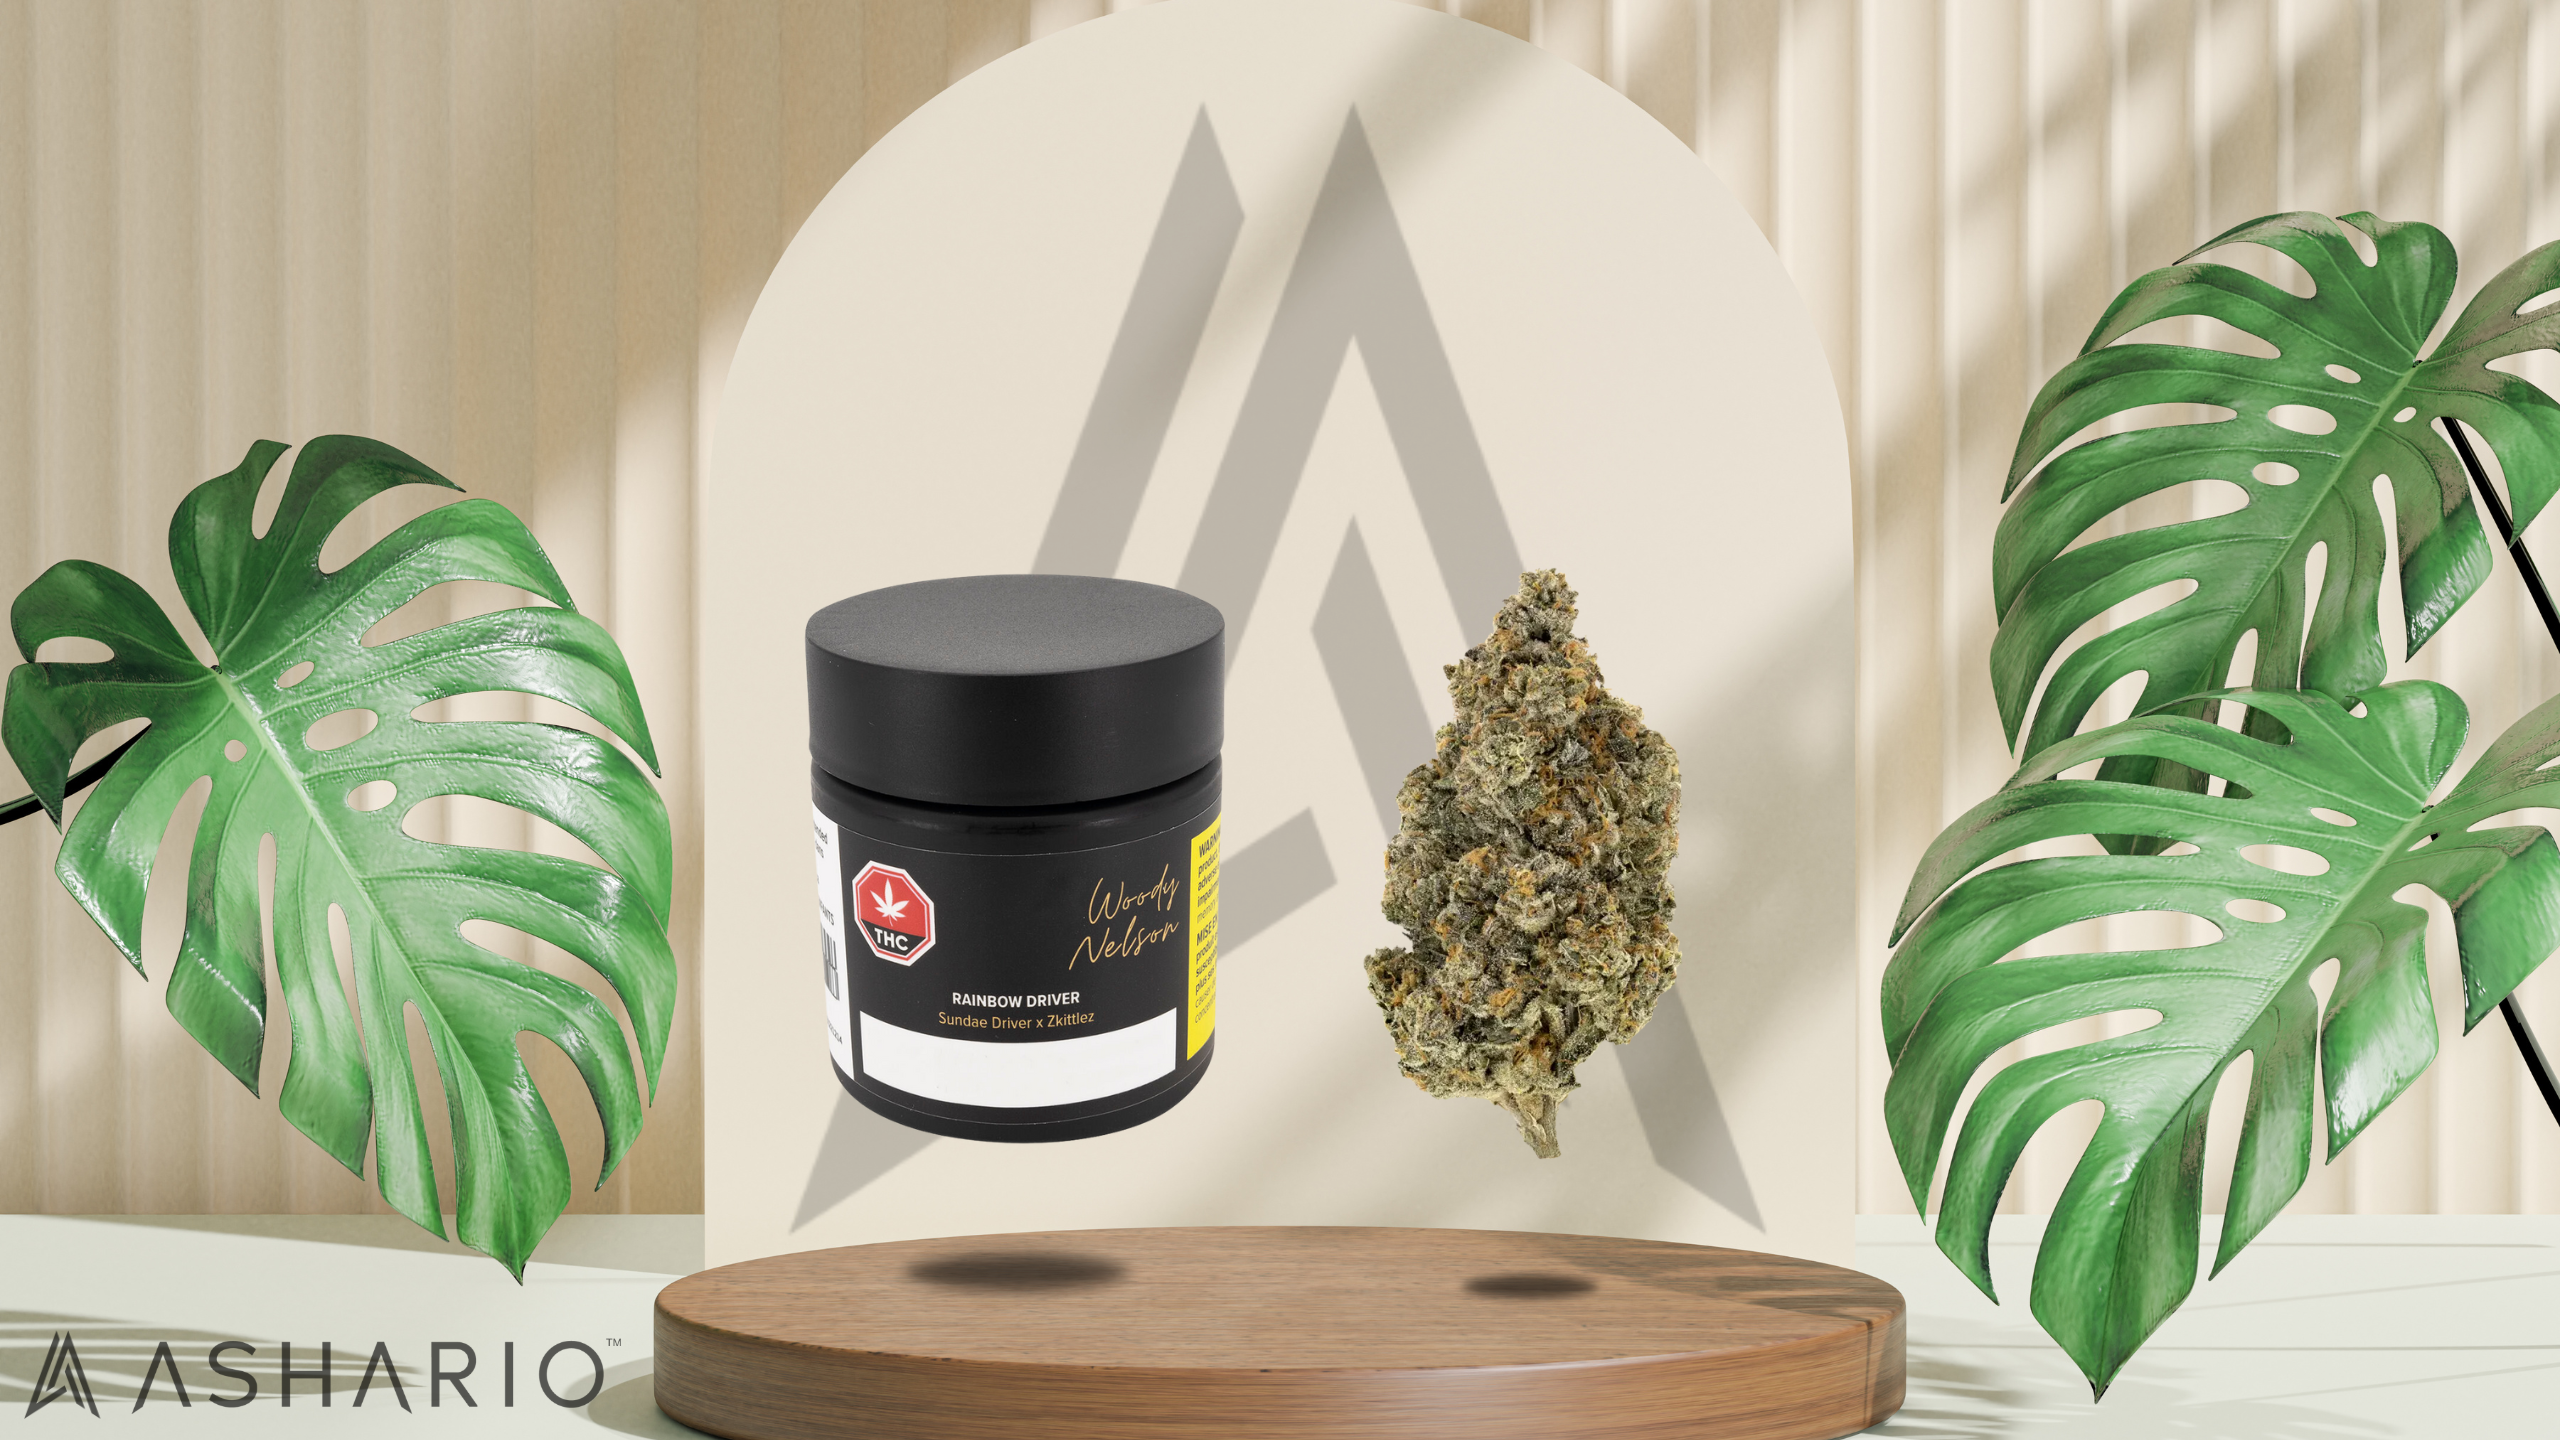 Join us as we shine a spotlight on Woody Nelson, a beloved brand in the cannabis community, courtesy of Ashario Cannabis.